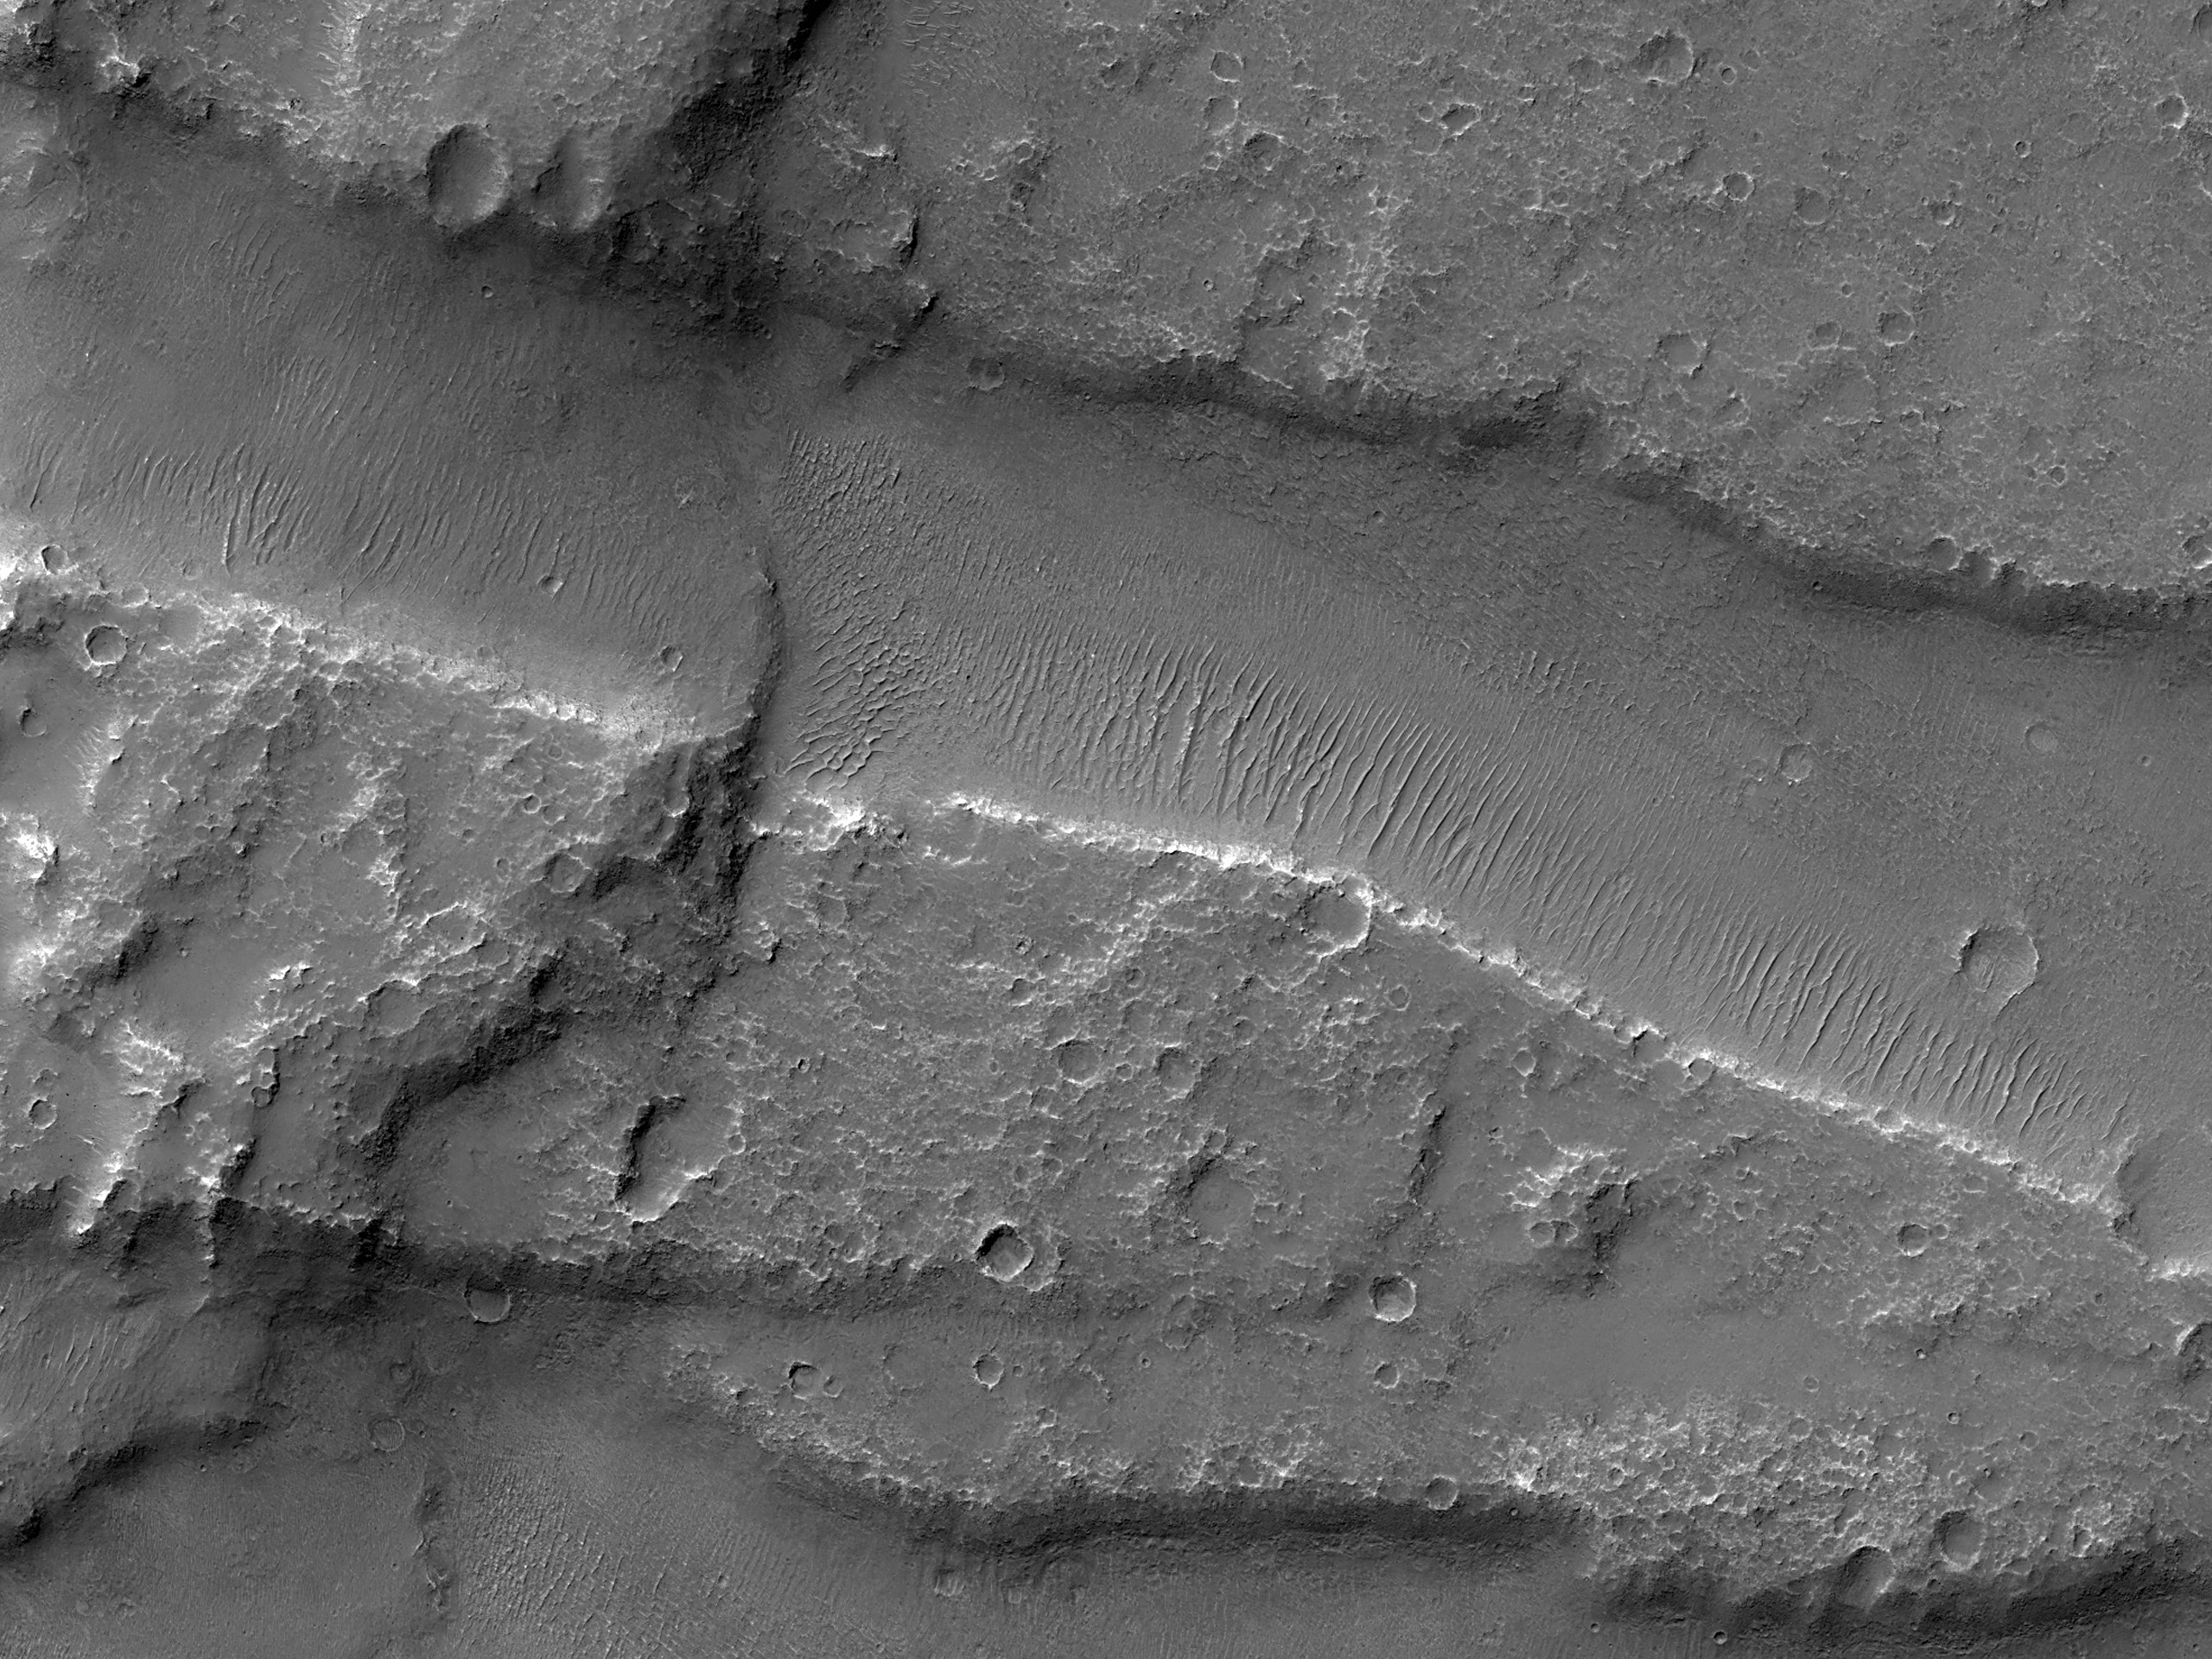 Finding Faults in Melas Chasma